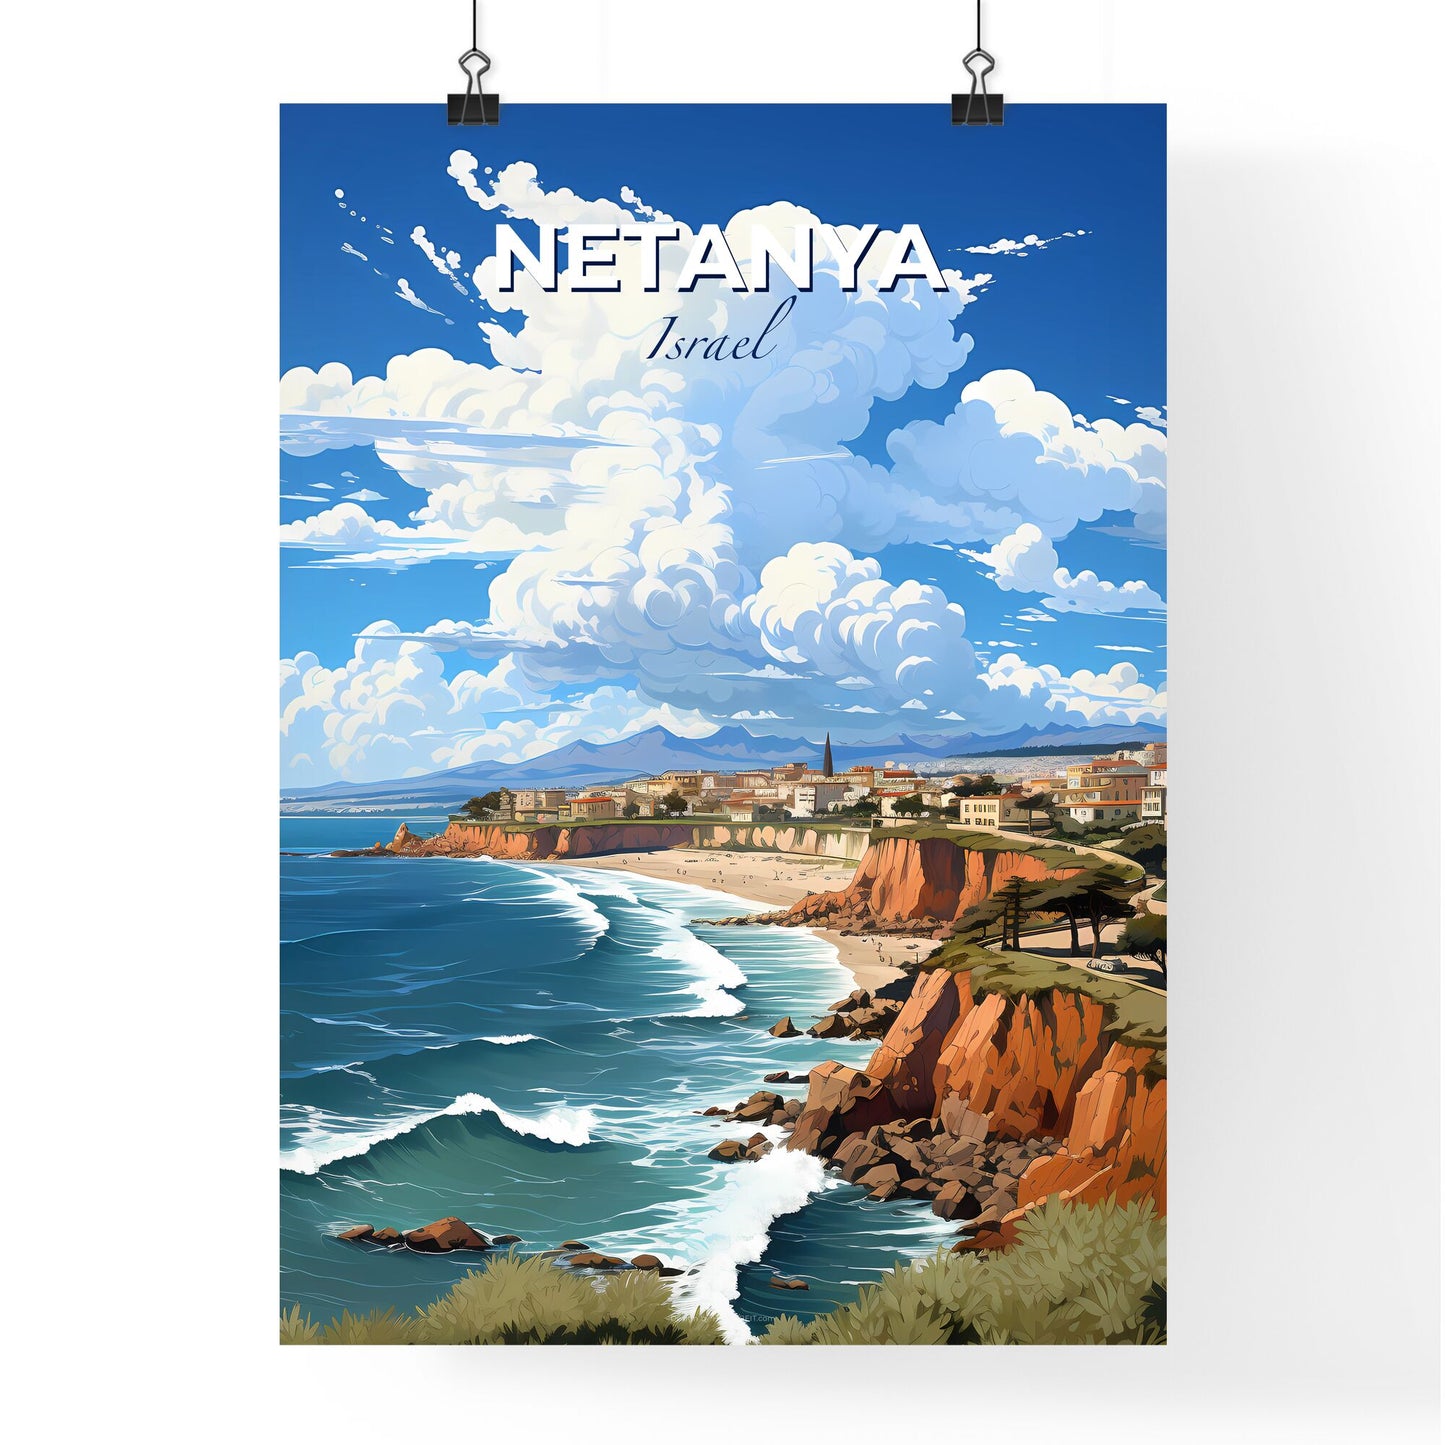 Vibrant Acrylic Painting of Netanya Israel Skyline Depicting a Picturesque Beach and Town Juxtaposition Default Title